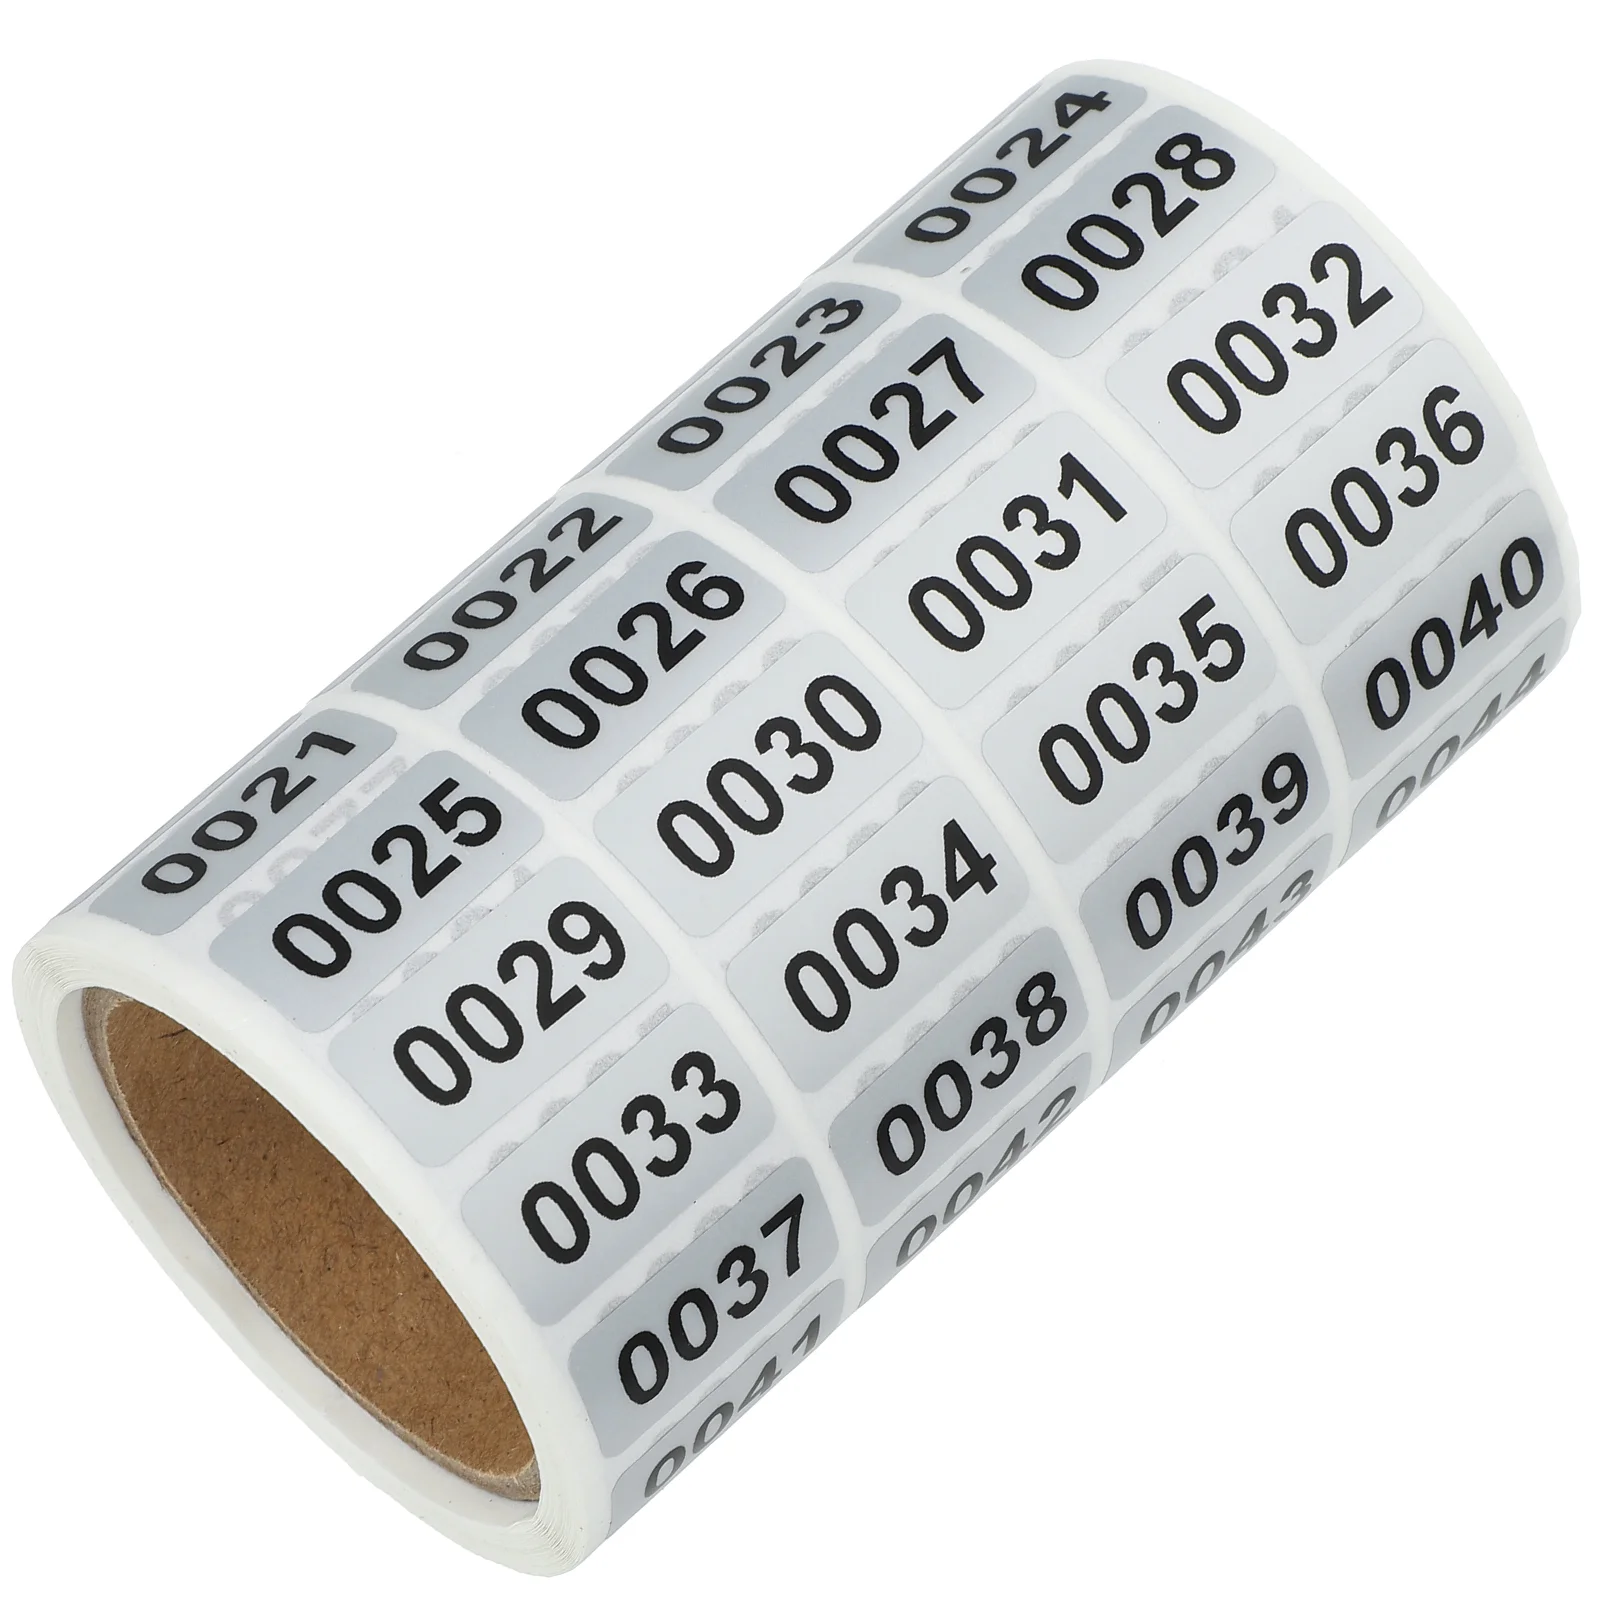 

Number 1-2000 Marker Stickers Labels Stickers Rectangular Labels Adhesive Number Decals Convenient Stickers